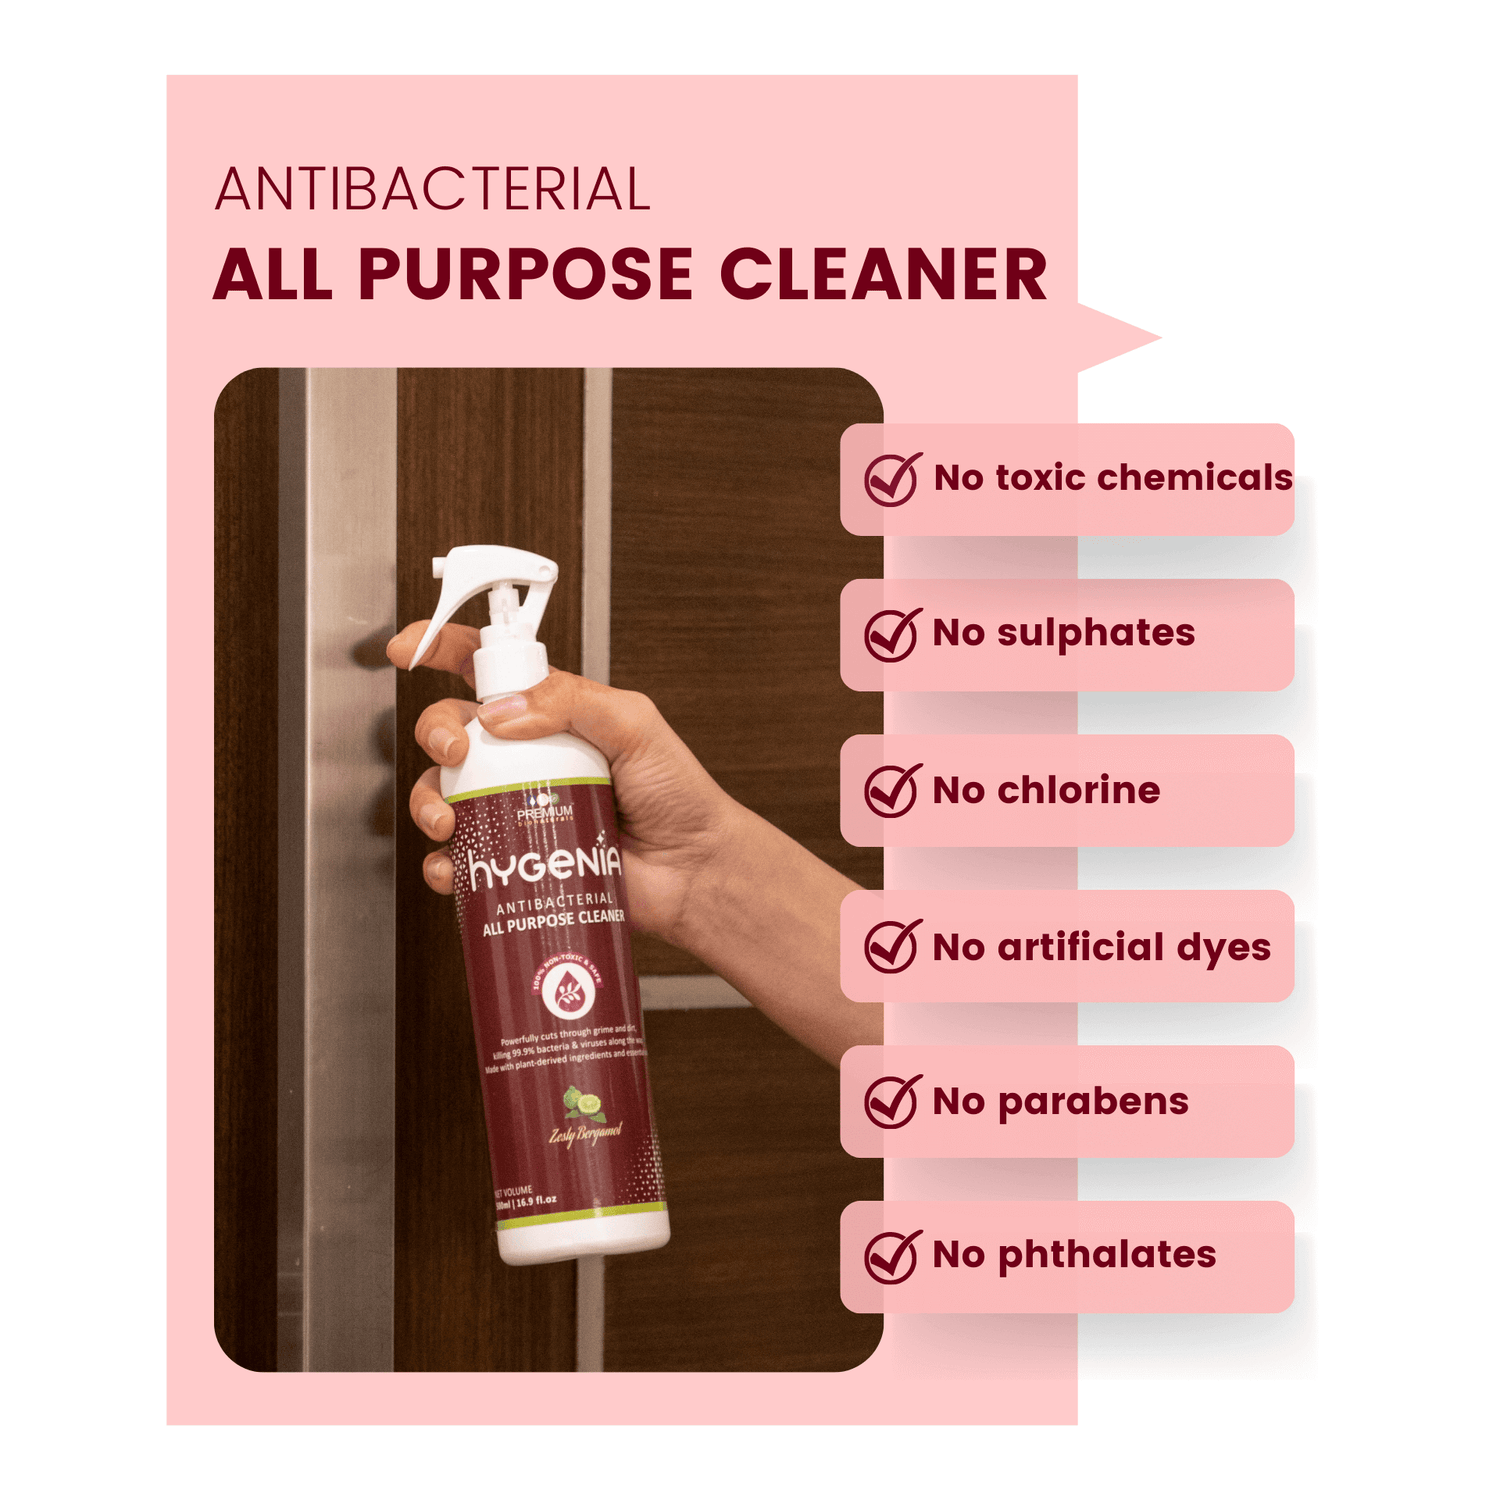 Premium Bionaturals guarantees no toxic chemicals – just pure, safe cleaning excellence for your home.